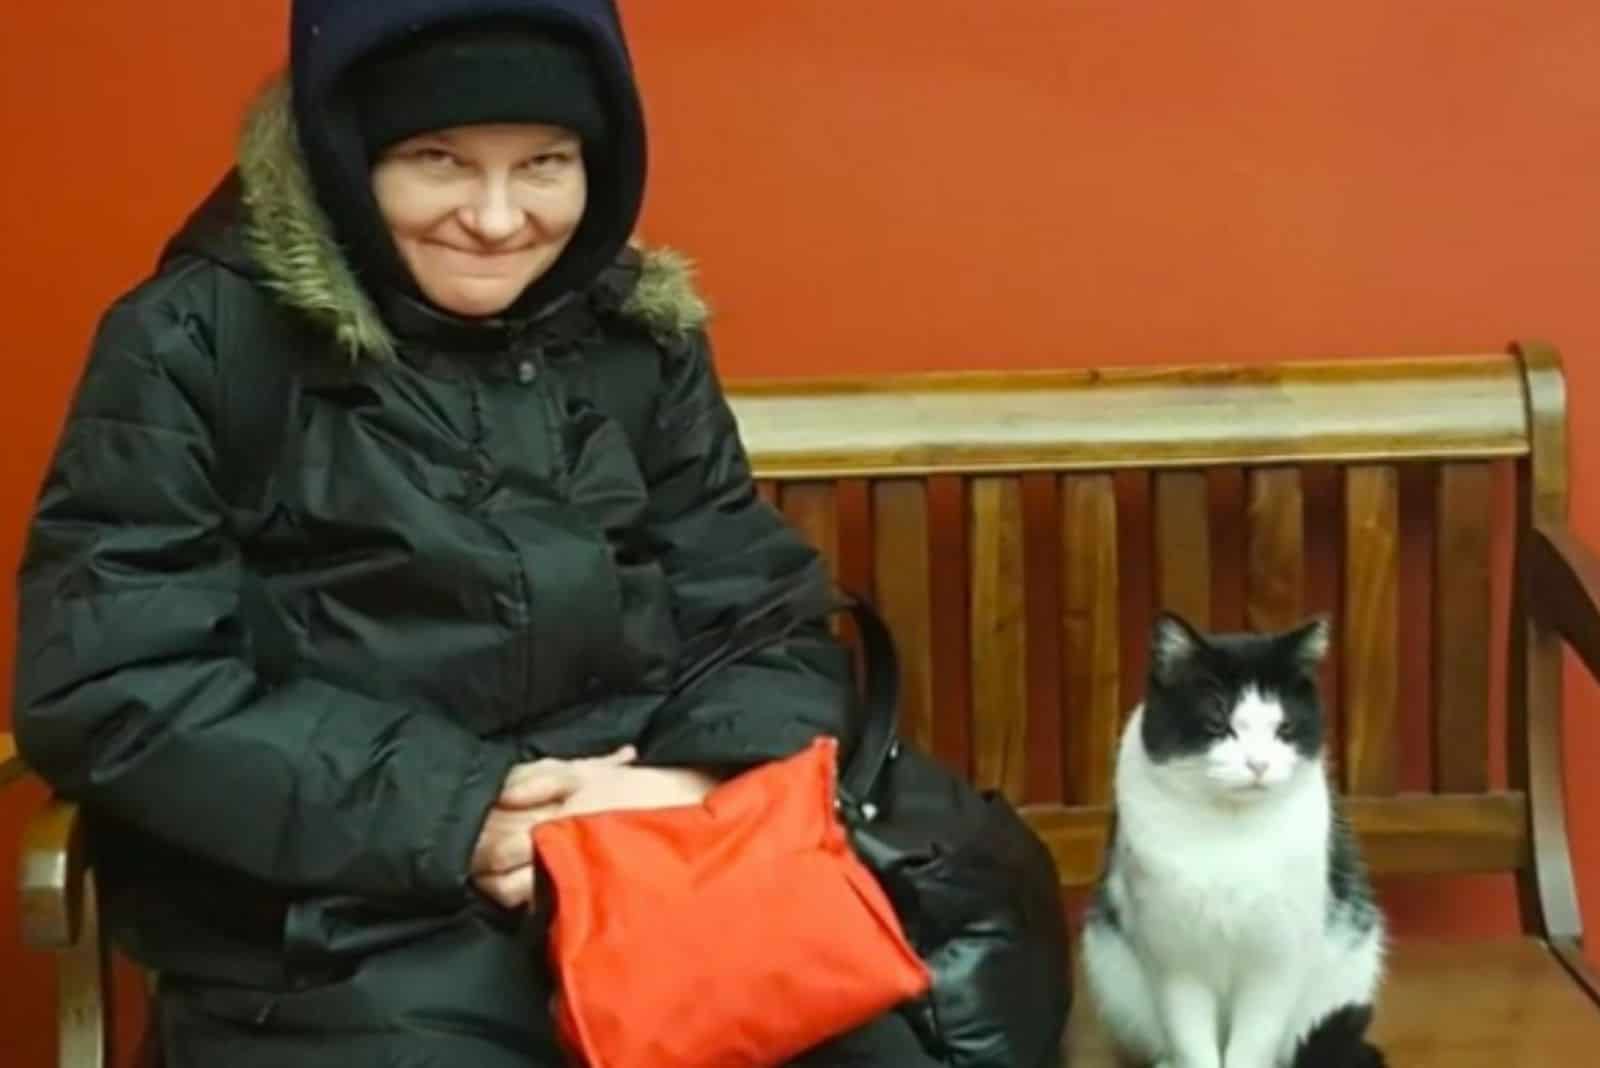 Oreo with a resident of a nursing home